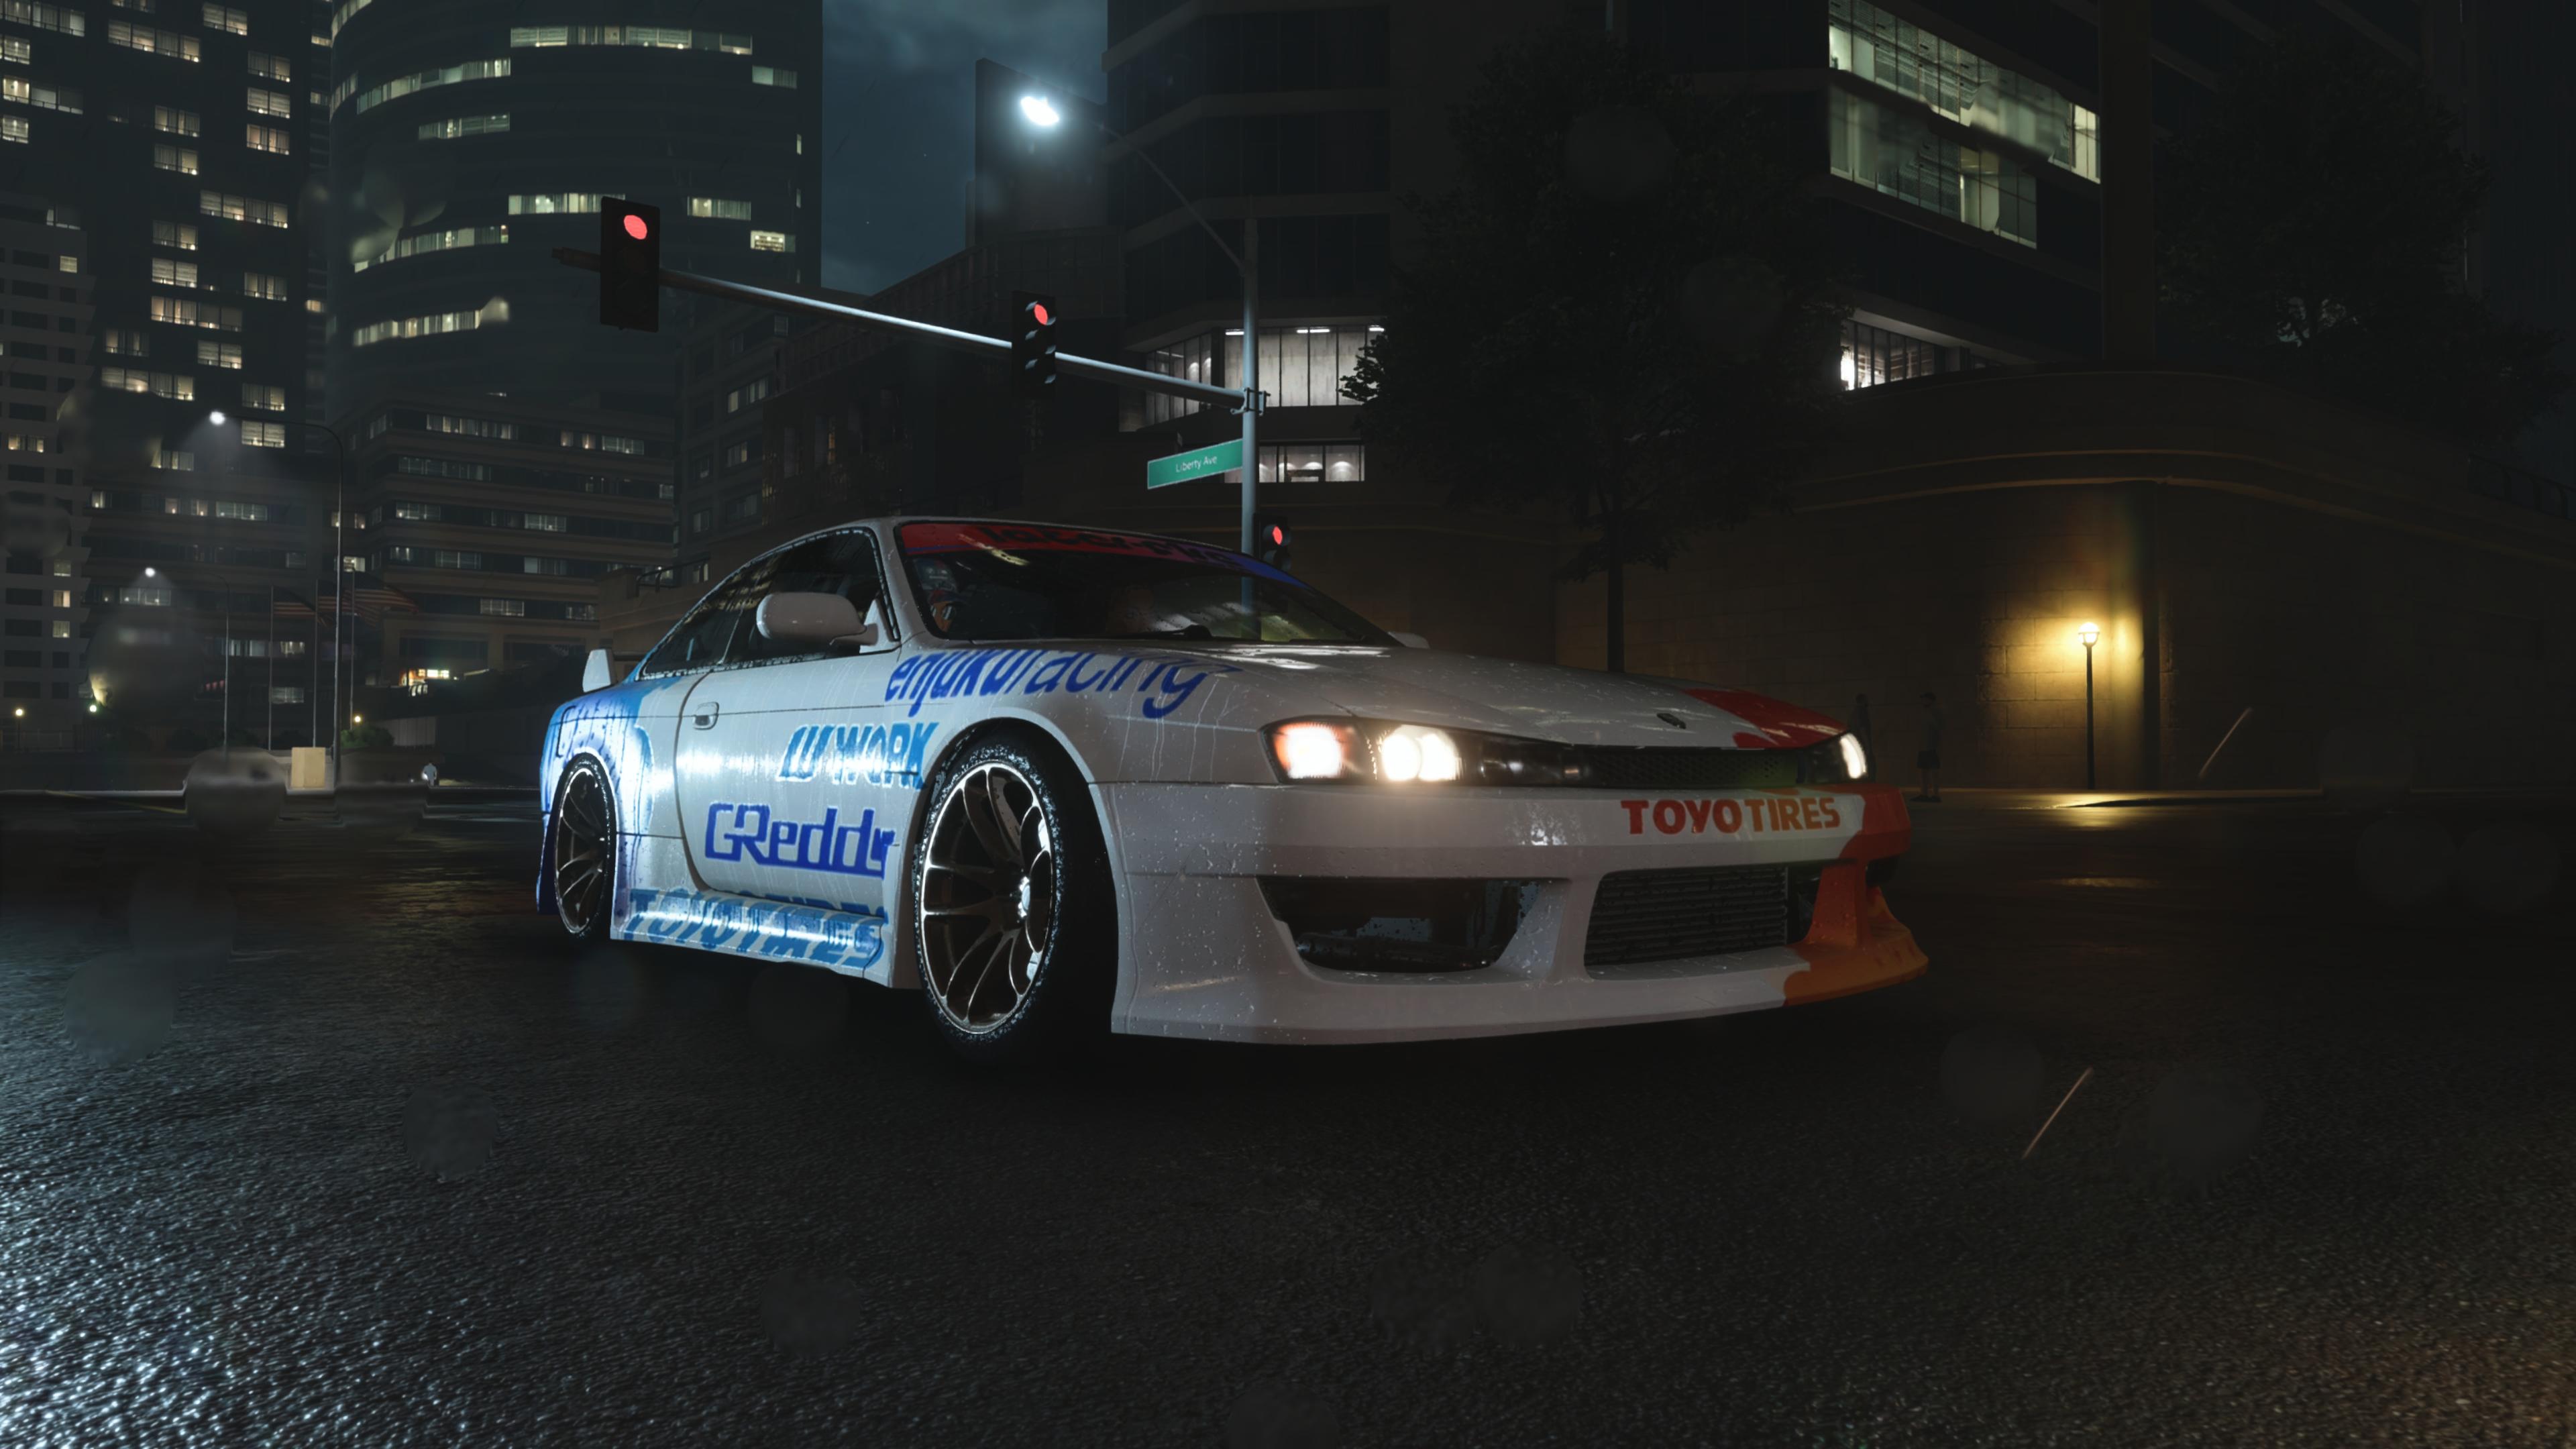 Need For Speed: Most Wanted review